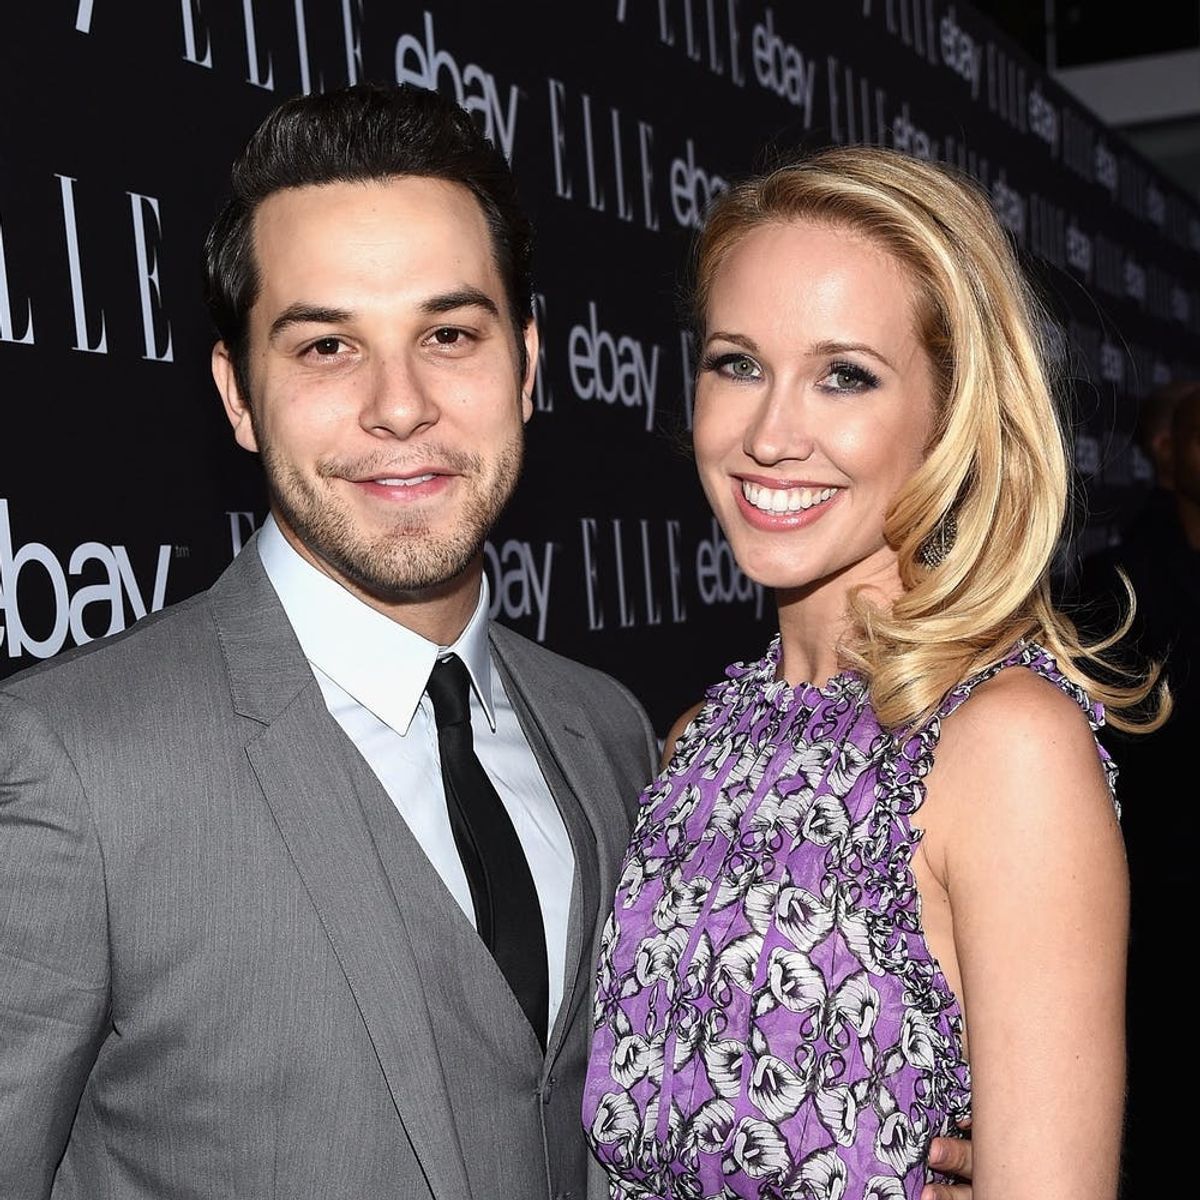 Pitch Perfect’s Skylar Astin’s Point About Engagement Rings for Men Makes So Much Sense